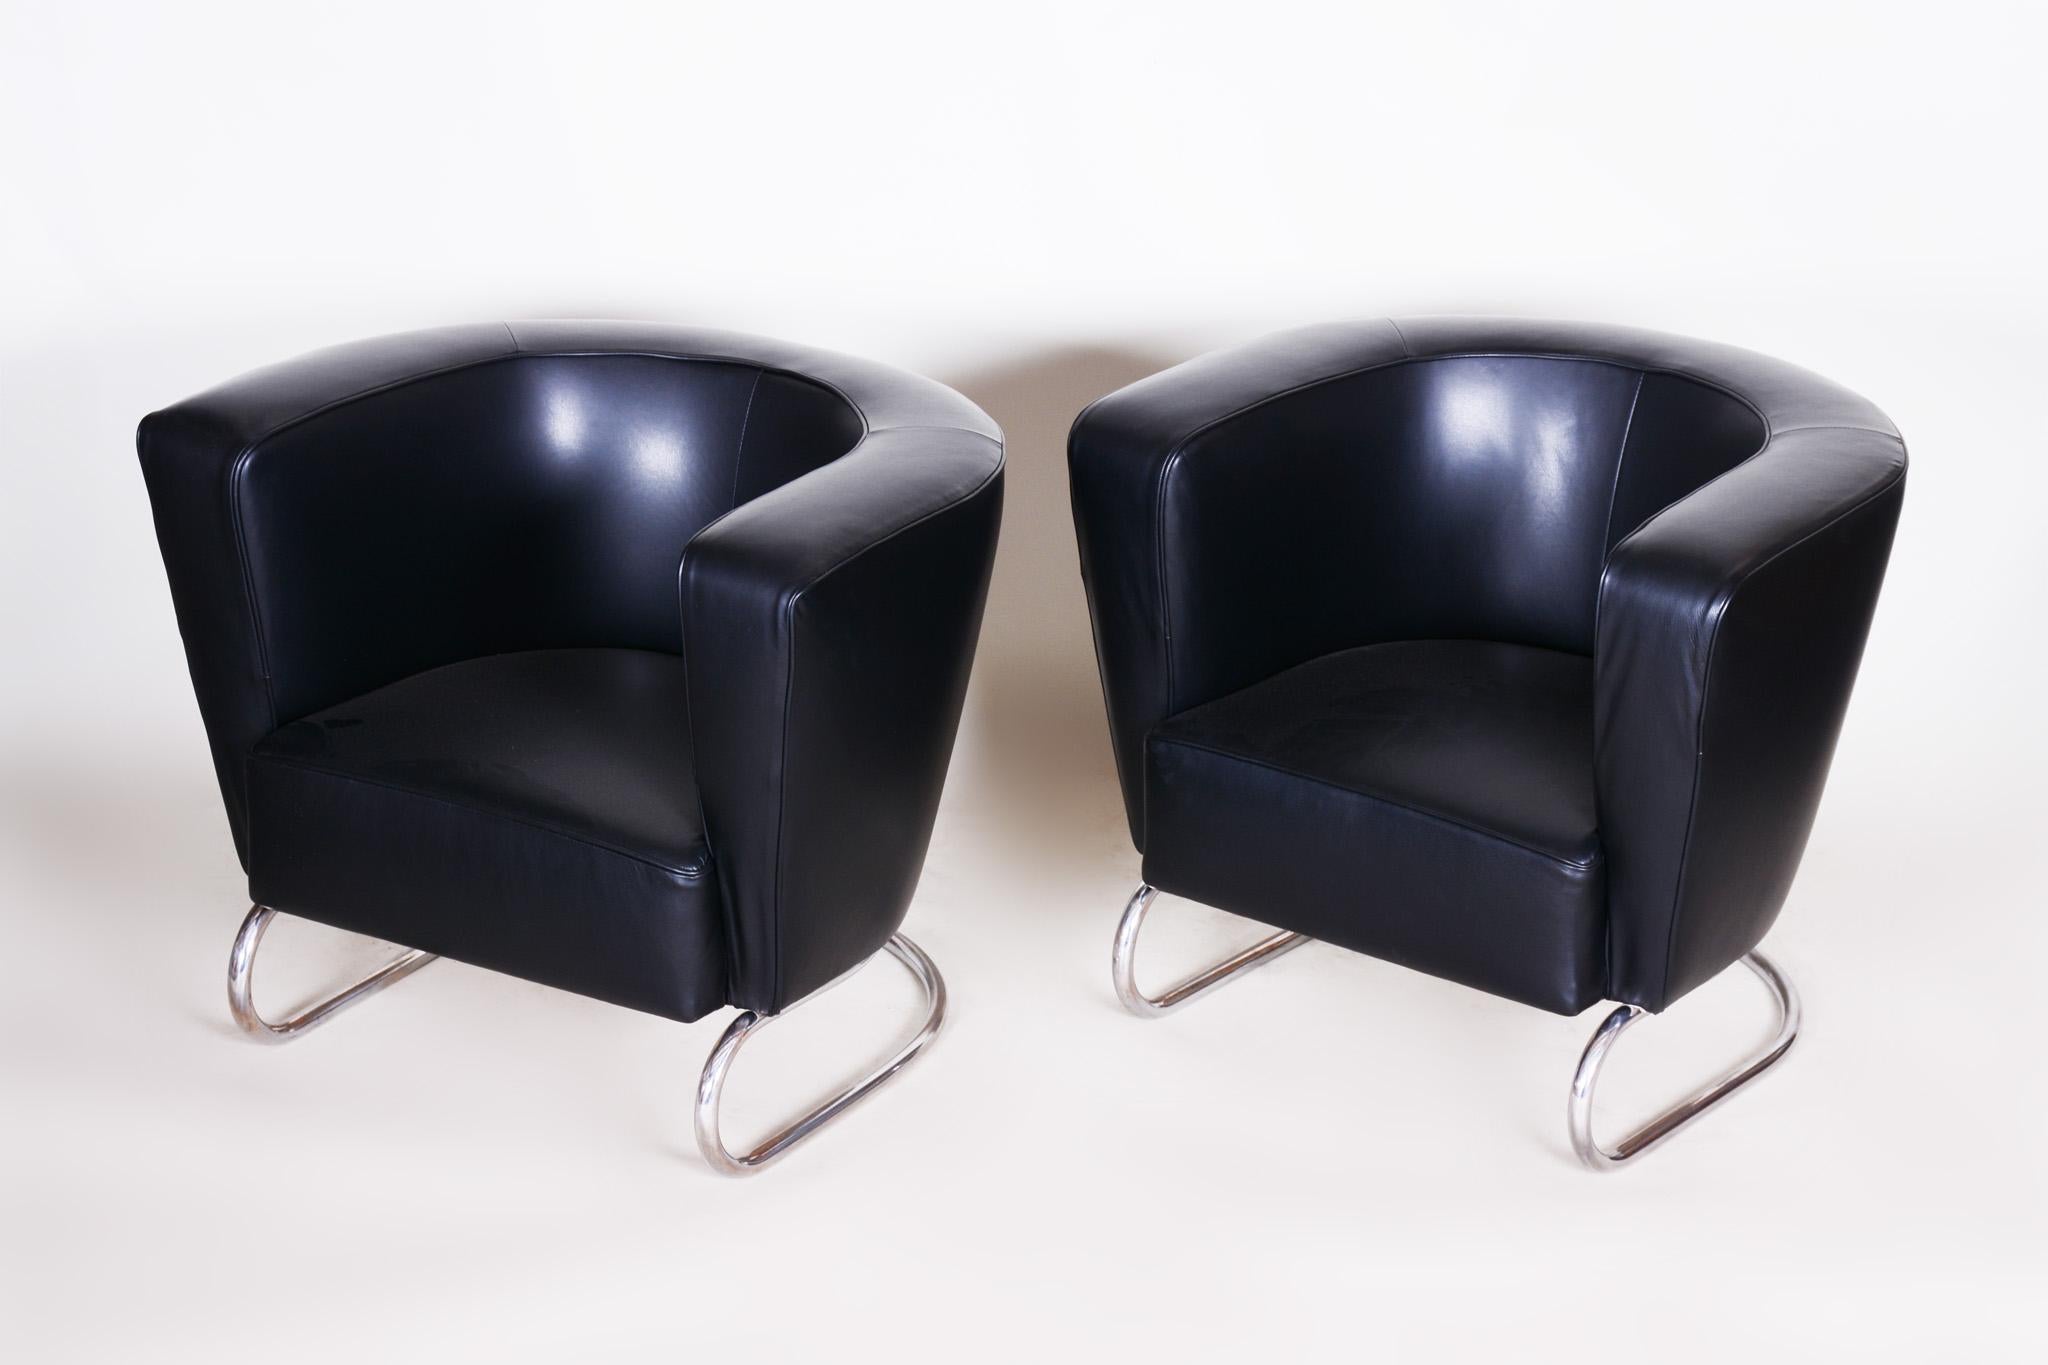 Pair of Black Art Deco Armchairs from Czechoslovakia by Jindrich Halabala, 1930s For Sale 2